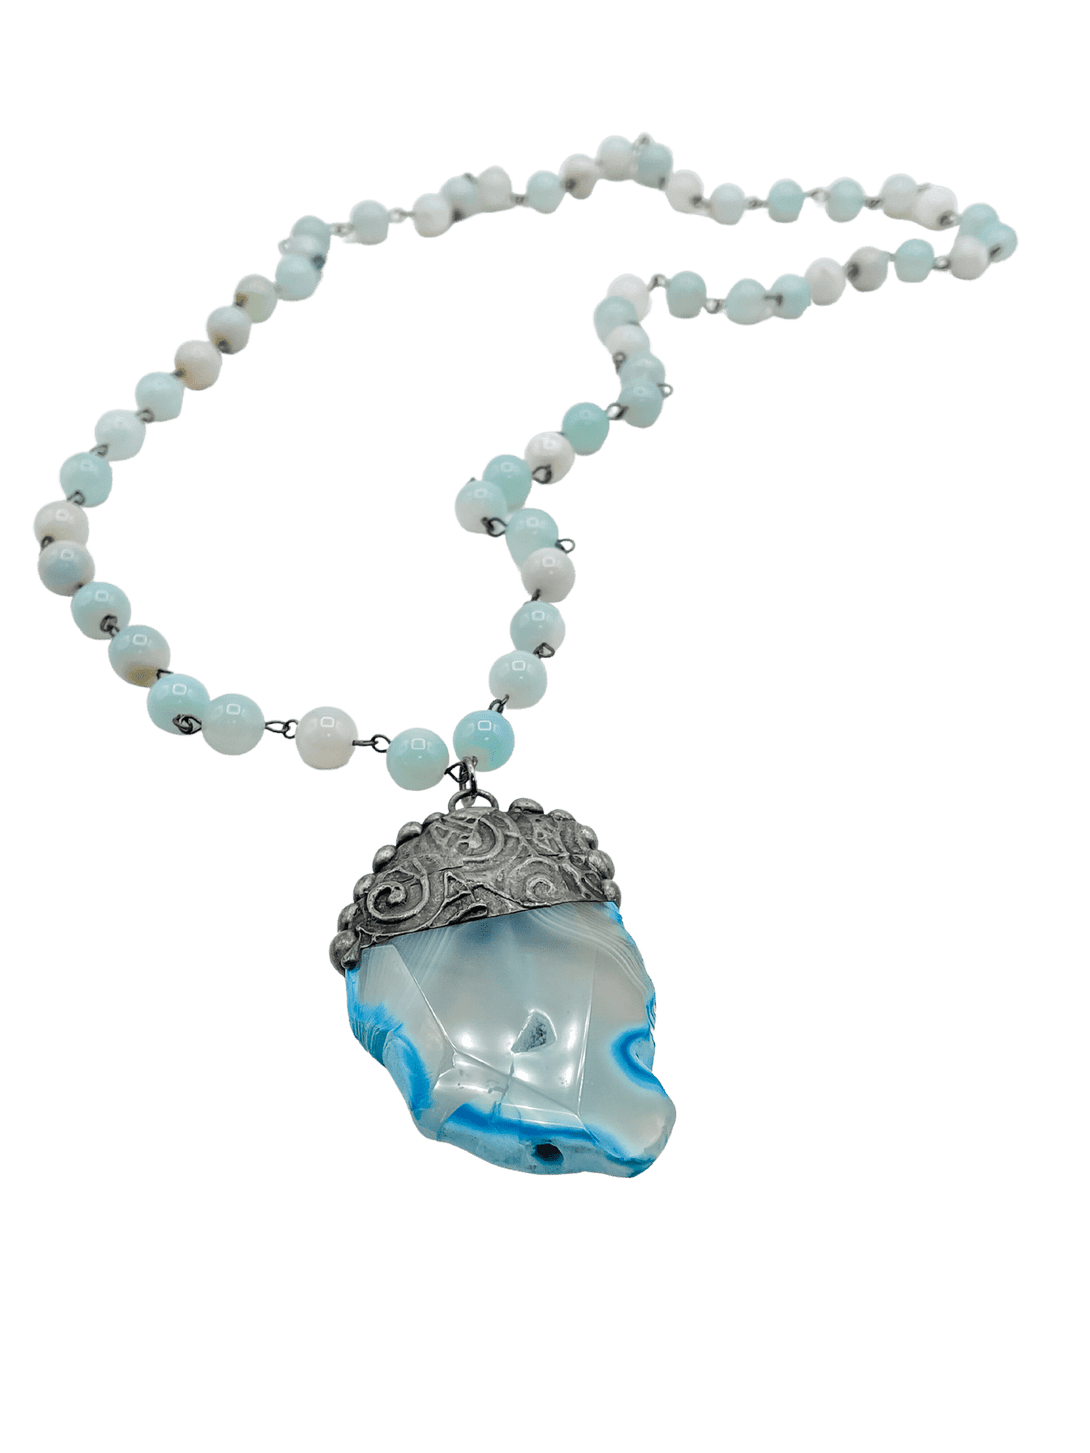 Necklace with Large Beads in Blues and Greens and Amazing Stone Pendant